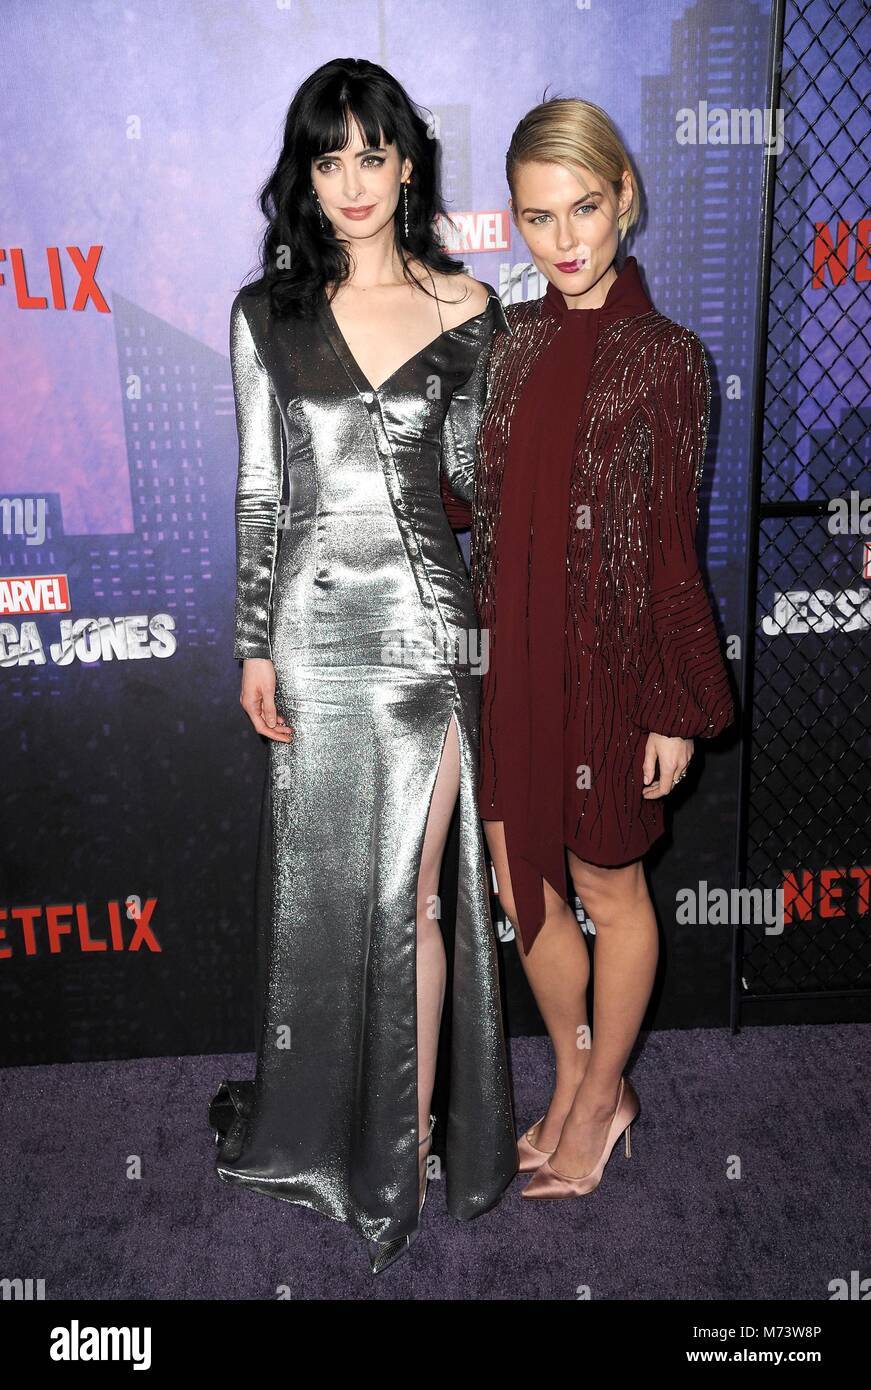 Krysten Ritter, Rachael Taylor at arrivals for MARVEL’S JESSICA JONES Season 2 Premiere, AMC Loews Lincoln Square, New York, NY March 7, 2018. Photo By: Kristin Callahan/Everett Collection Stock Photo